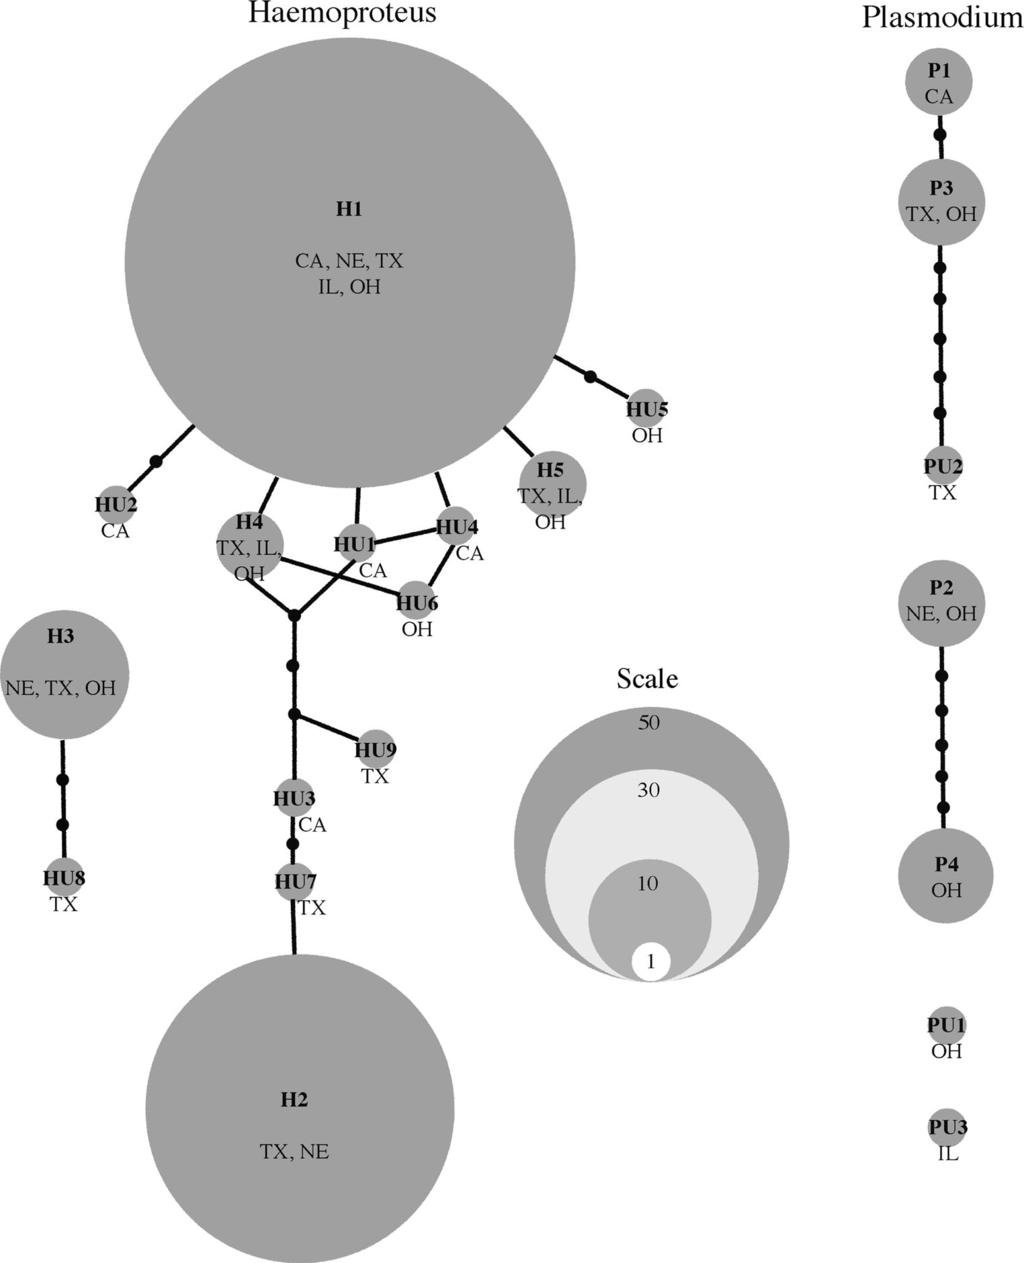 242 Genetica (2014) 142:235 249 Fig. 3 Haplotype networks for Haemoproteus and Plasmodium avian malaria parasites, with confidence limits for creating connections set at 95 %.